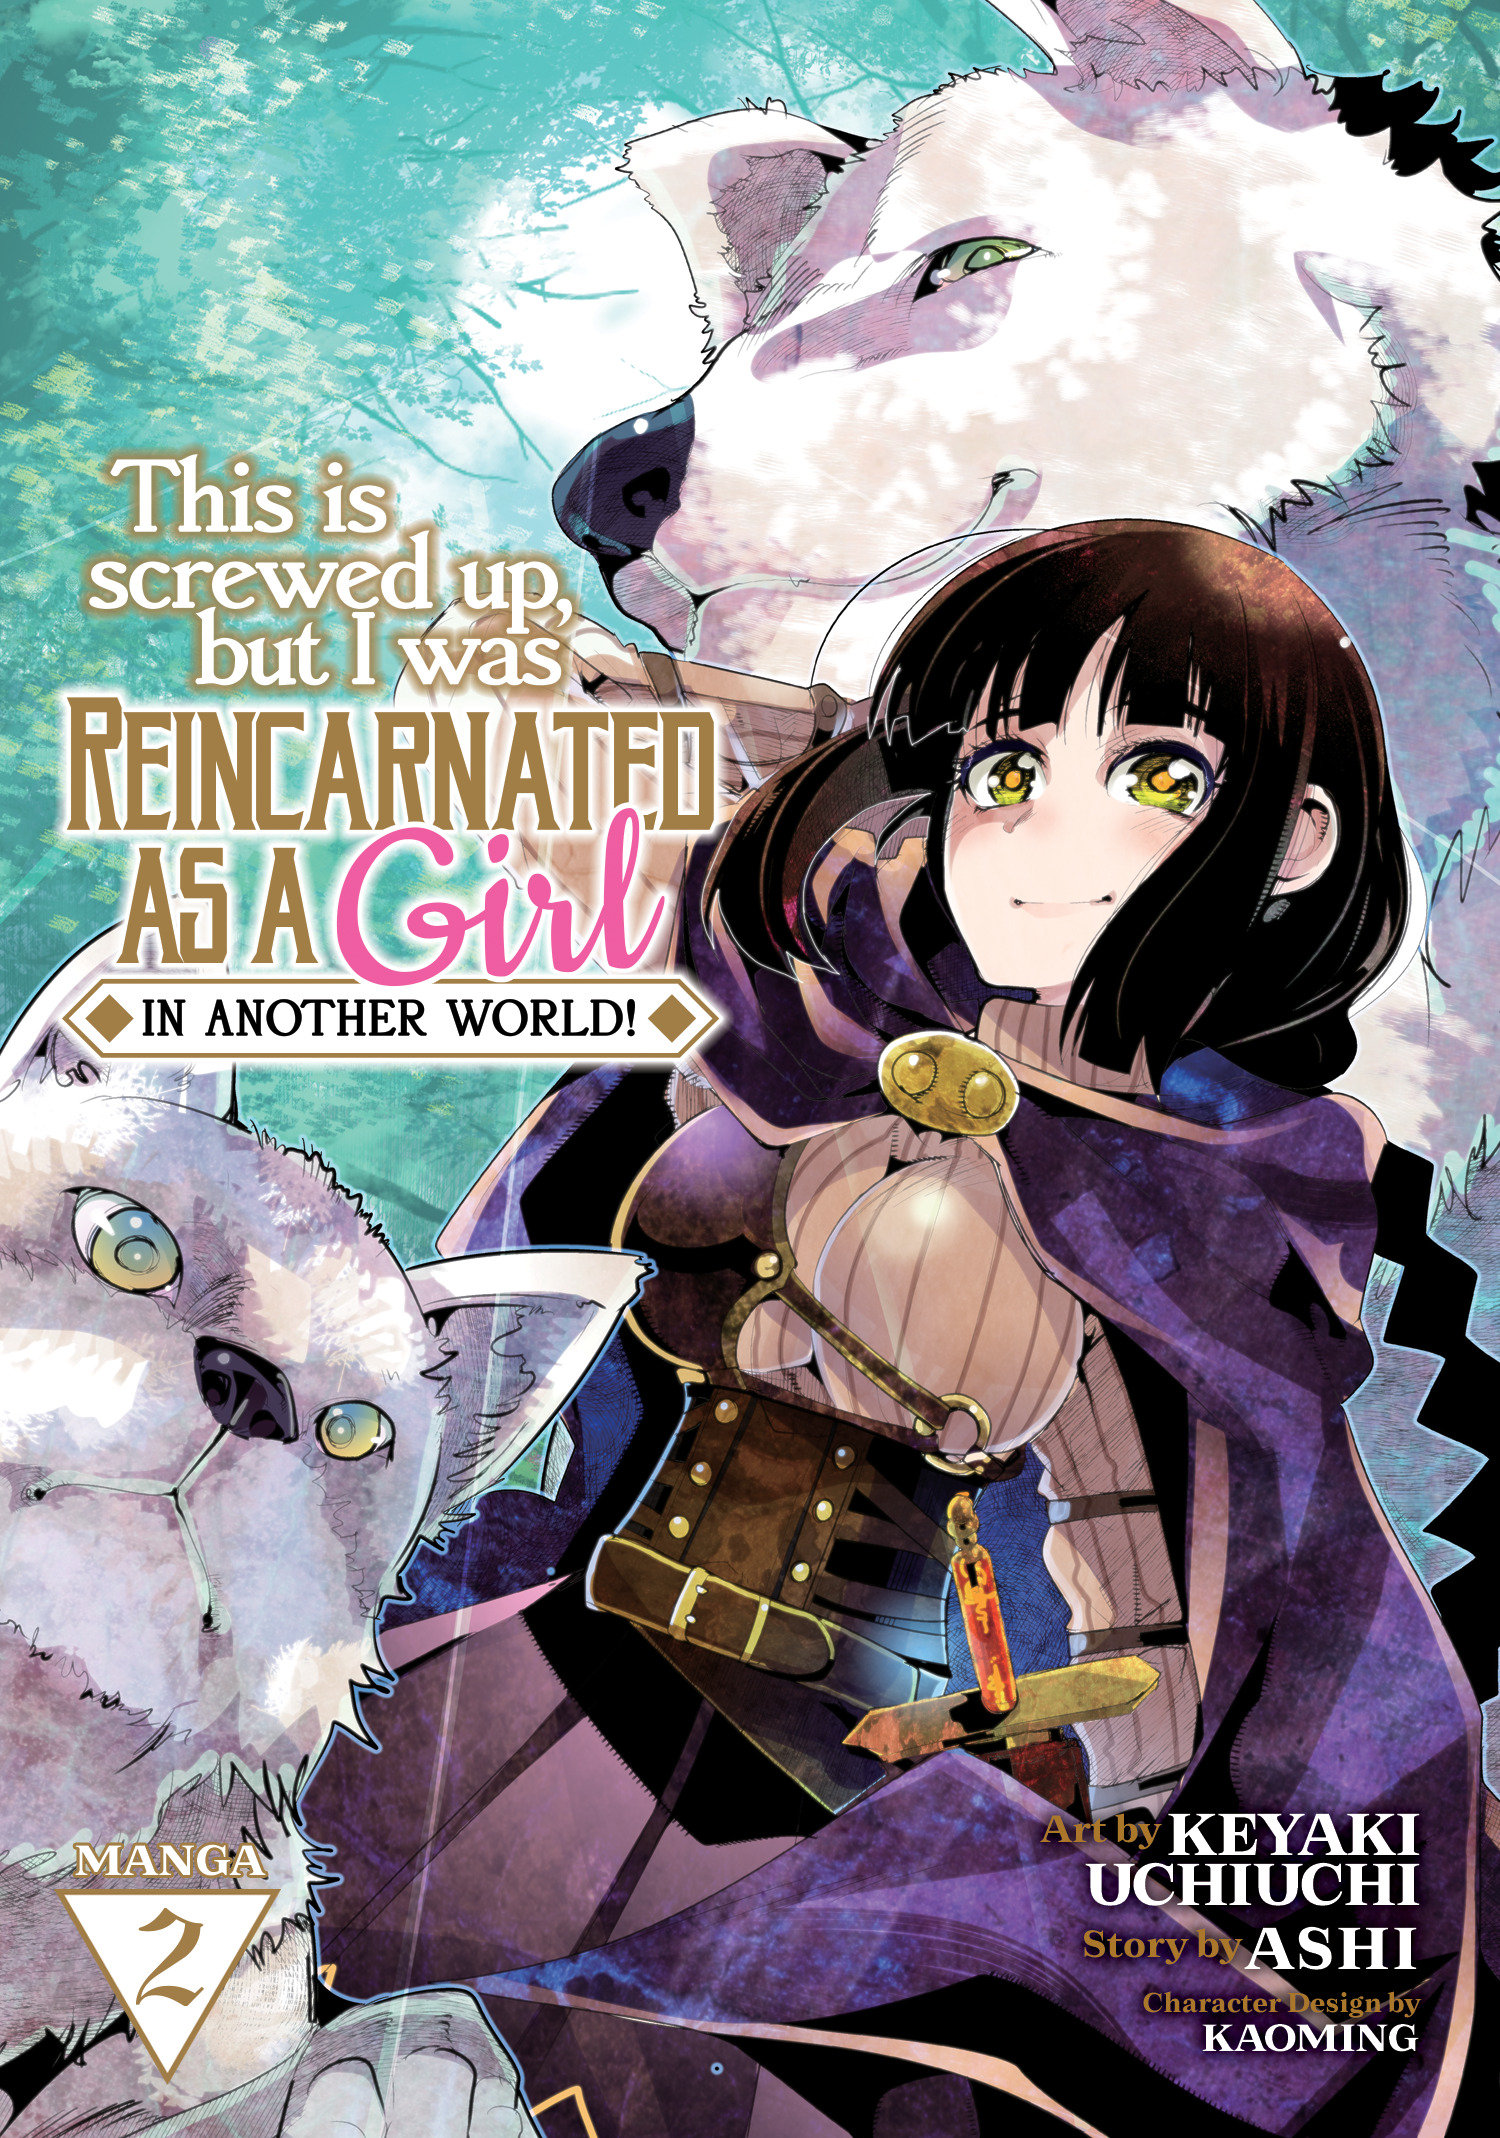 This is Screwed Up, But I Was Reincarnated as a Girl in Another World! Manga Volume 2